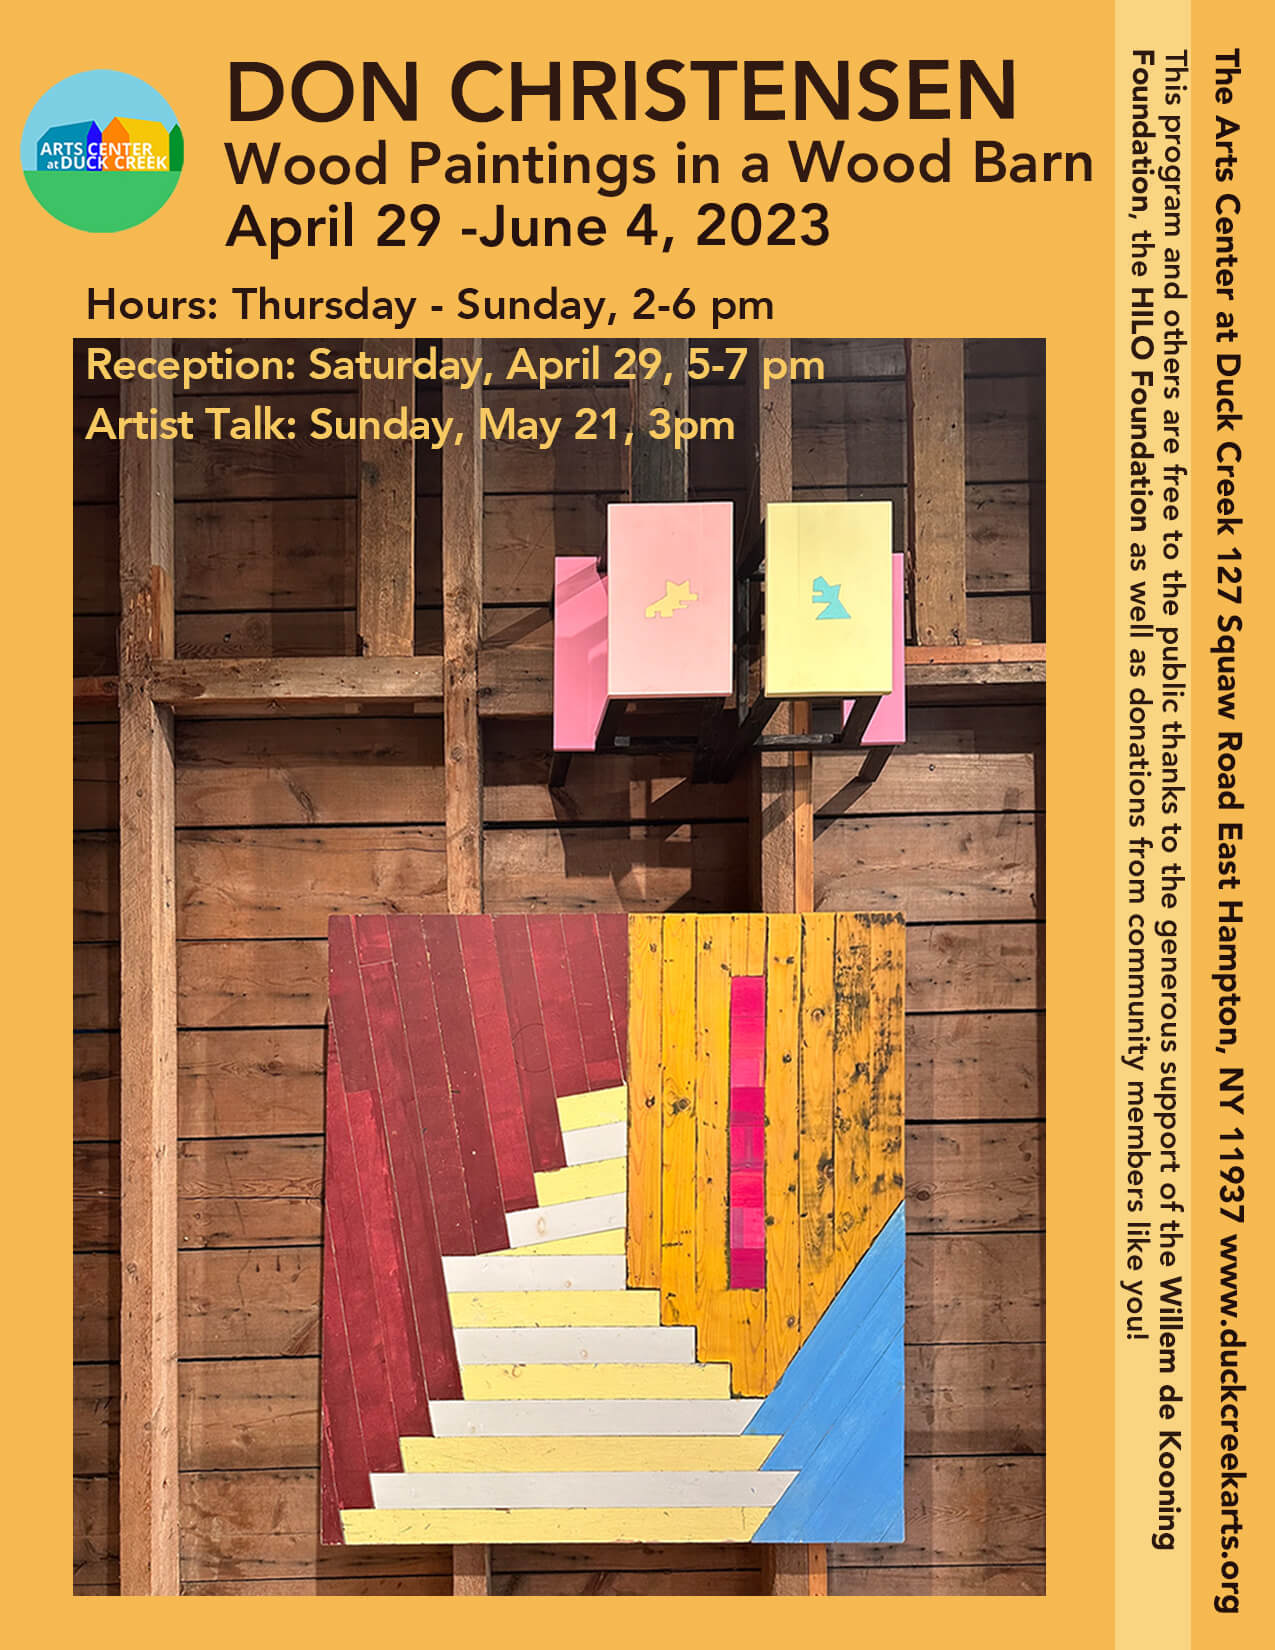 Exhibition 2023, Wood Paintings in a Wood Barn, Don Christensen